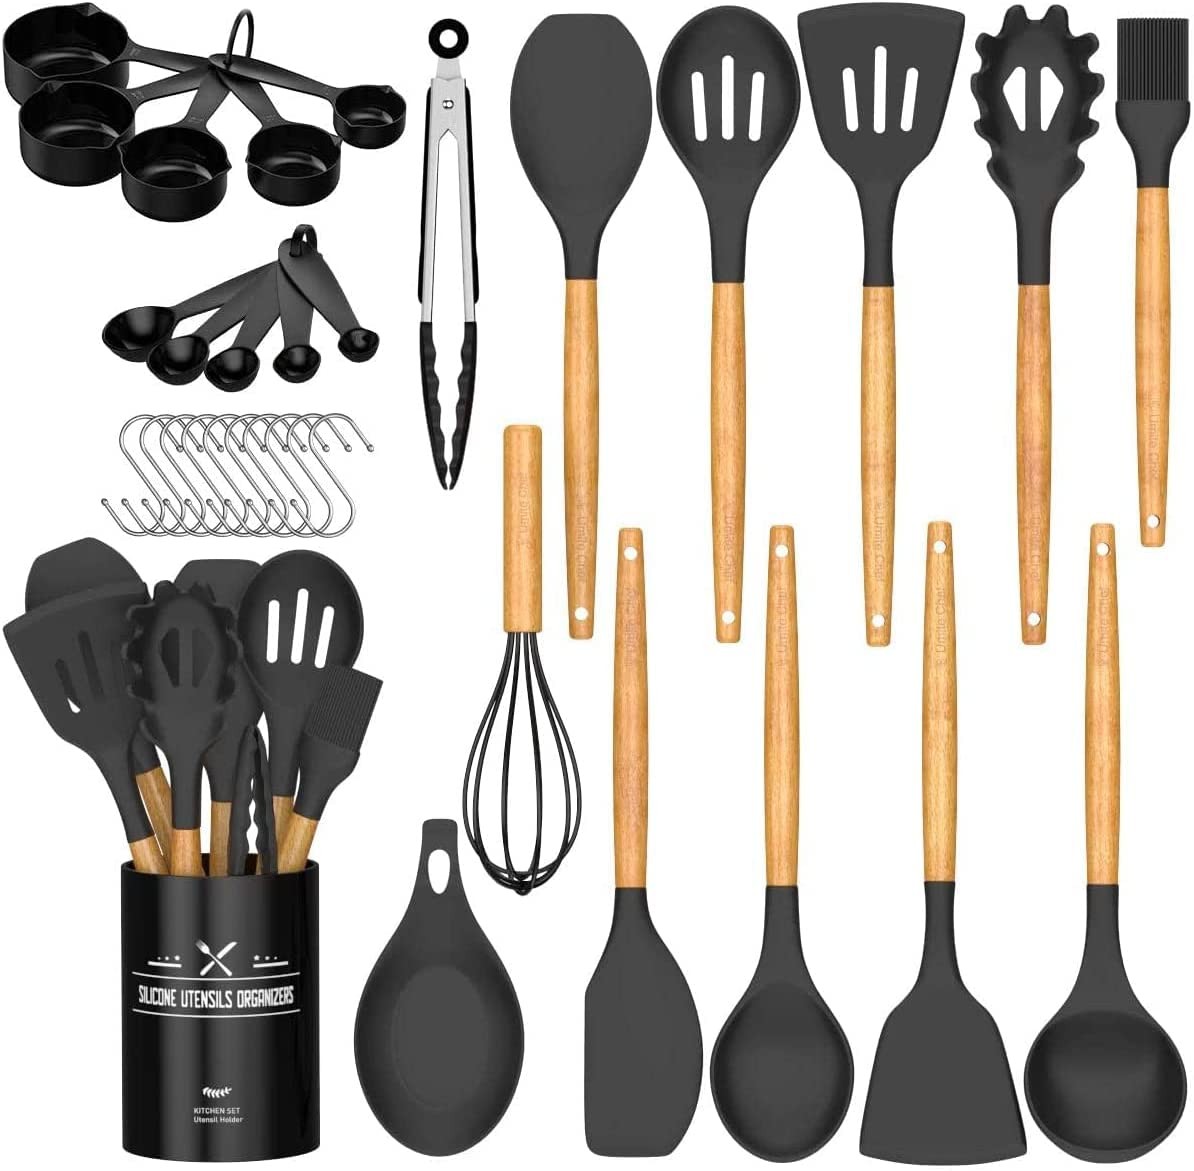 24 Pieces EveJoWare Kitchen Cooking Utensils Set, Non-stick Silicone Cooking Kitchen Utensils Spatula Set with Holder, Wooden Handle Silicone Kitchen Gadgets Utensil Set, BPA Free Non Toxic Cooking Ut